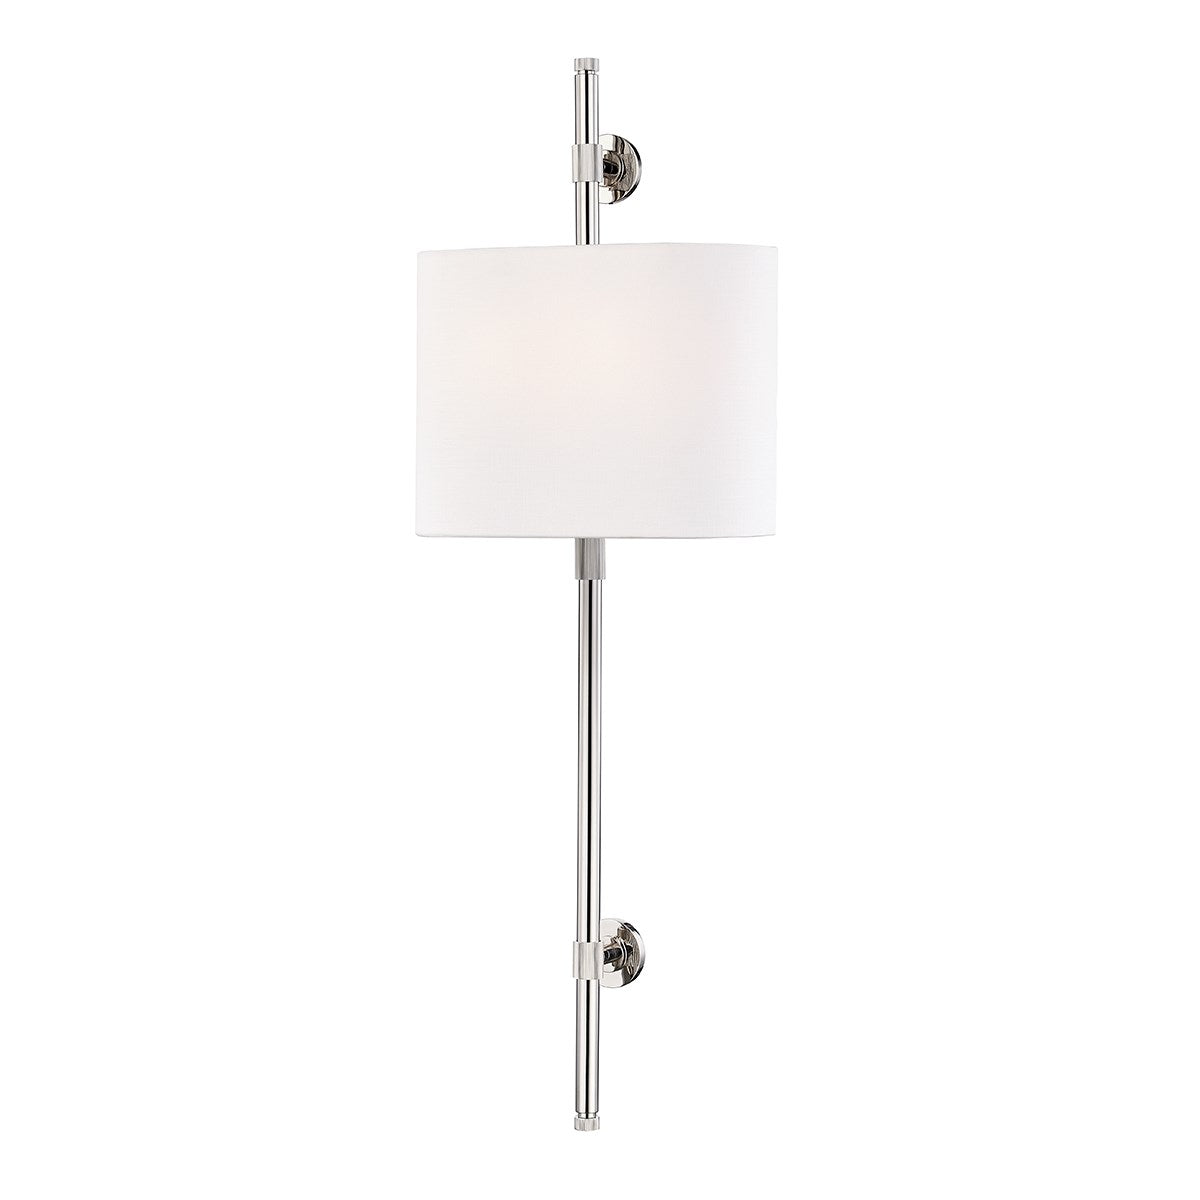 BOWERY 2 LIGHT WALL SCONCE POLISHED NICKEL